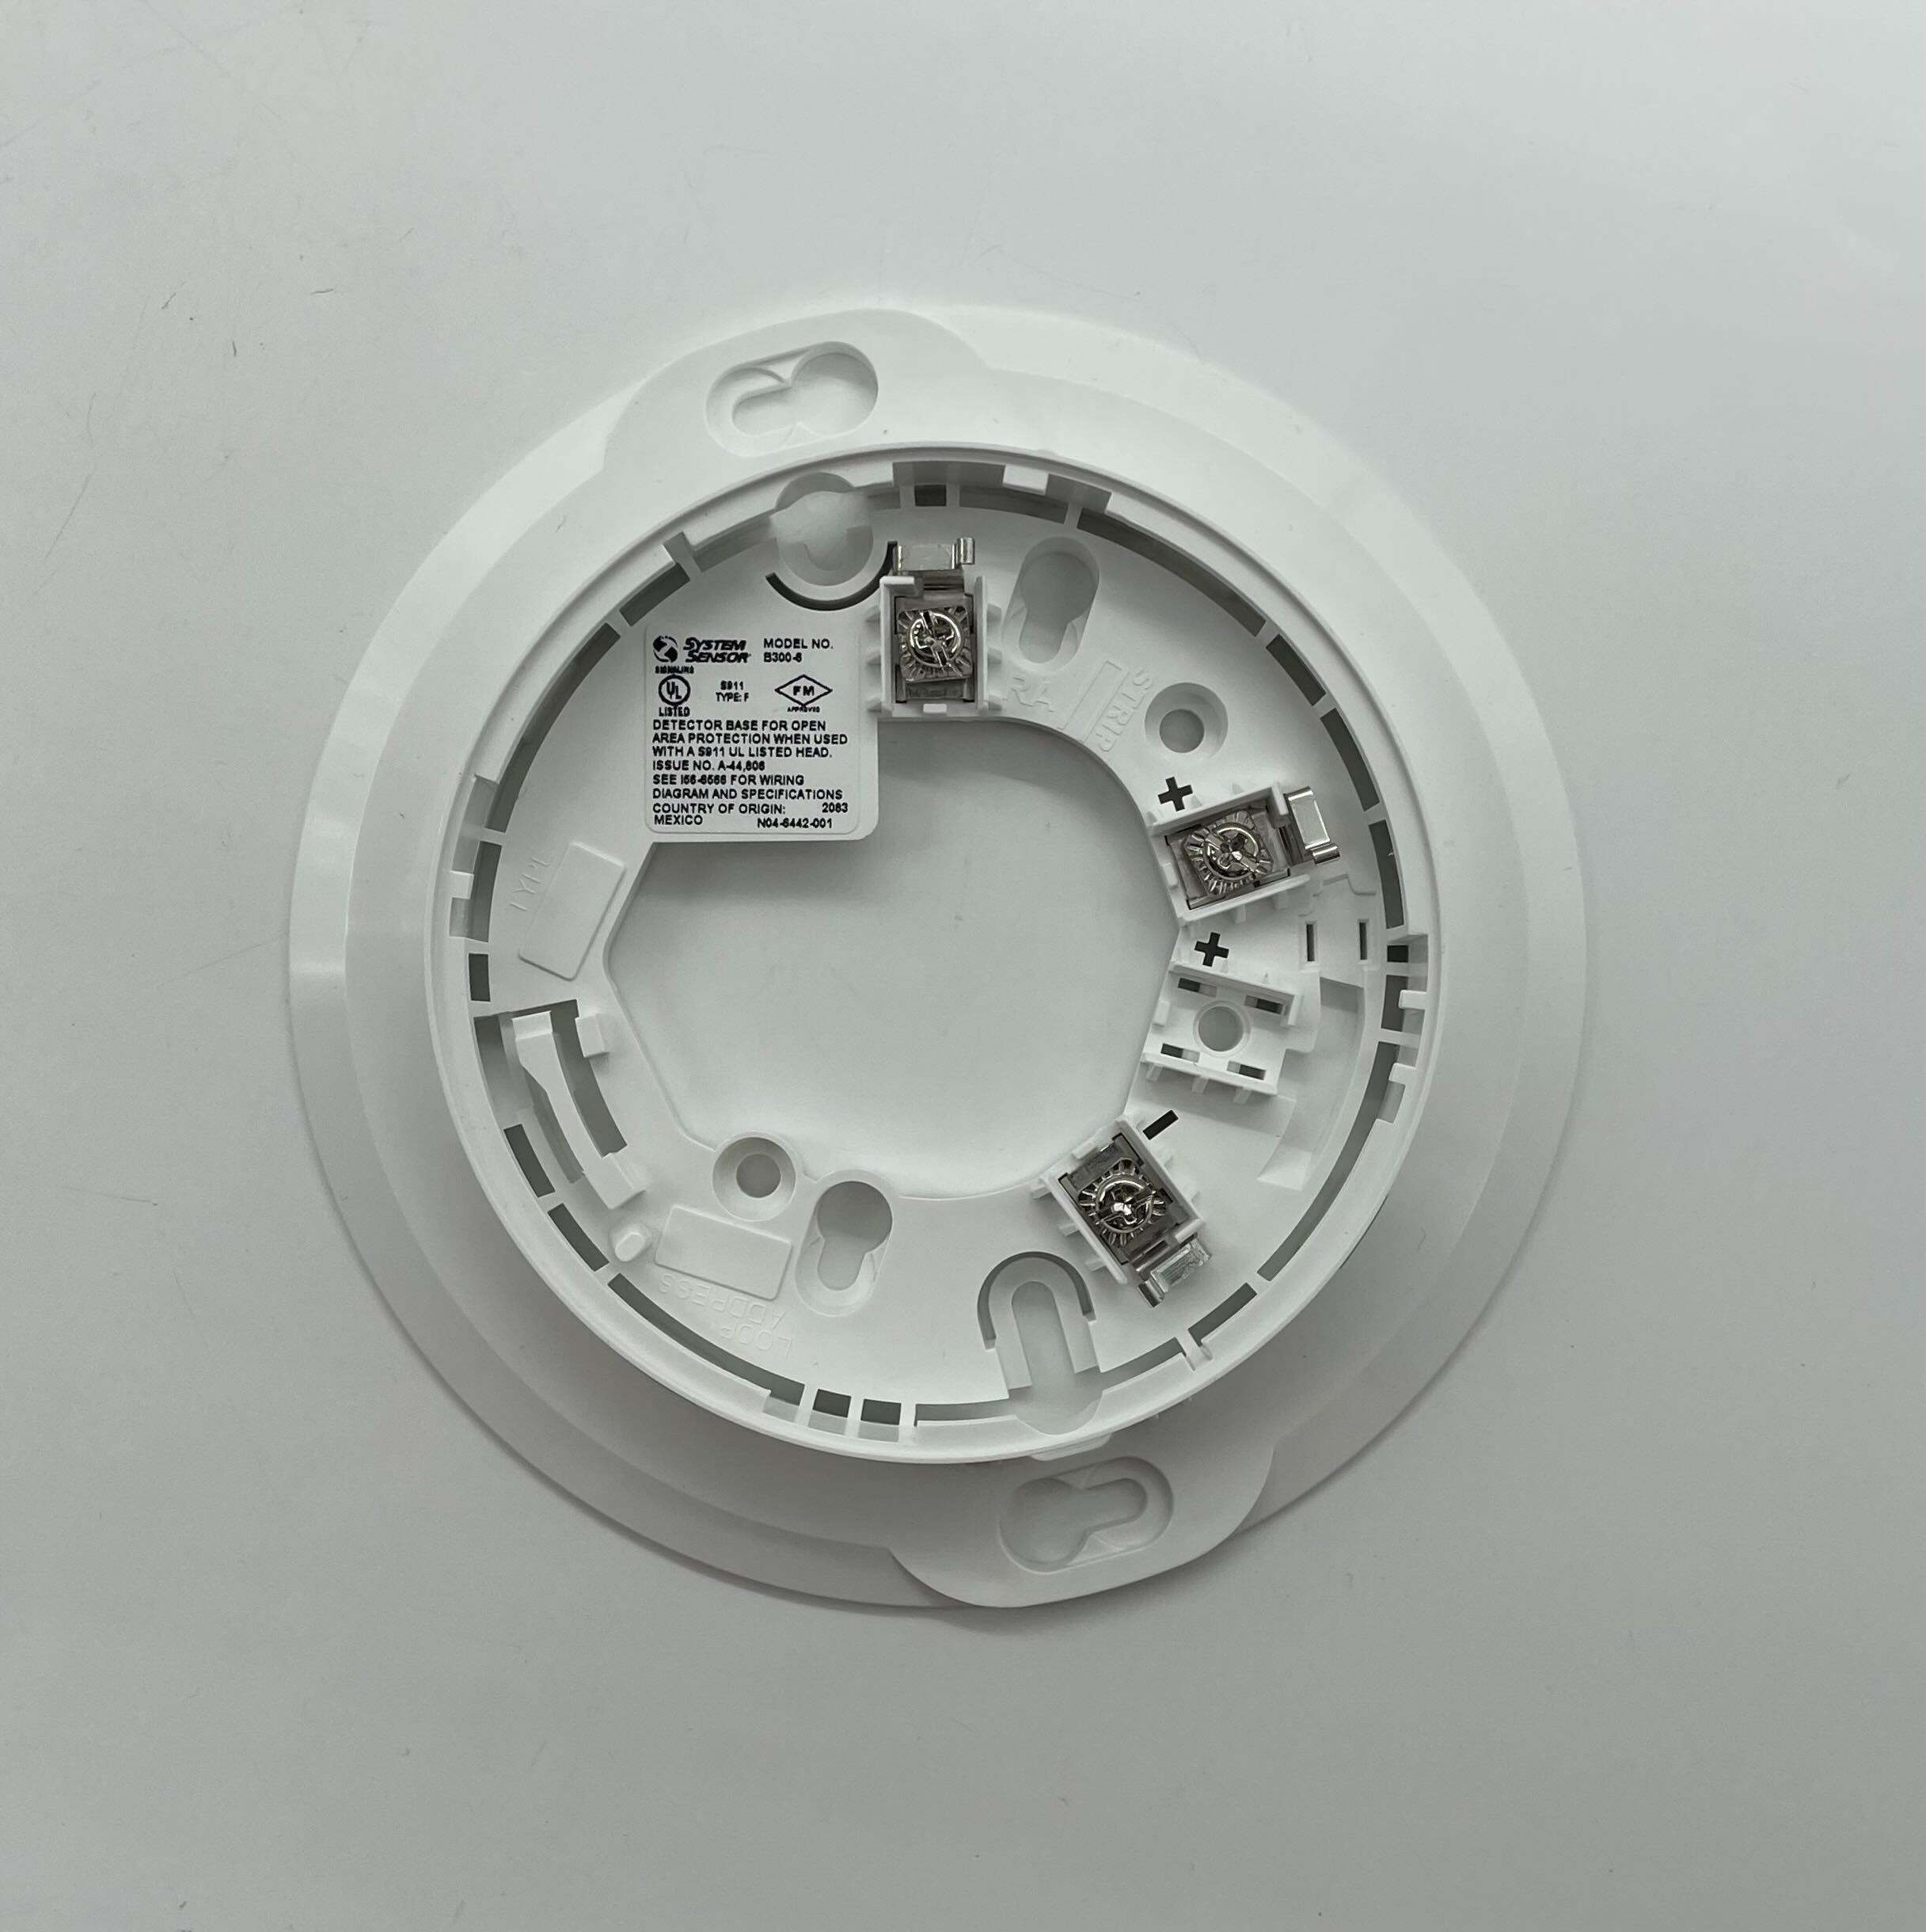 Firelite SD365 Series intelligent plug-in smoke detectors with enhanced optical sensing chamber and stable communication two-wire SLC loop connection Click here